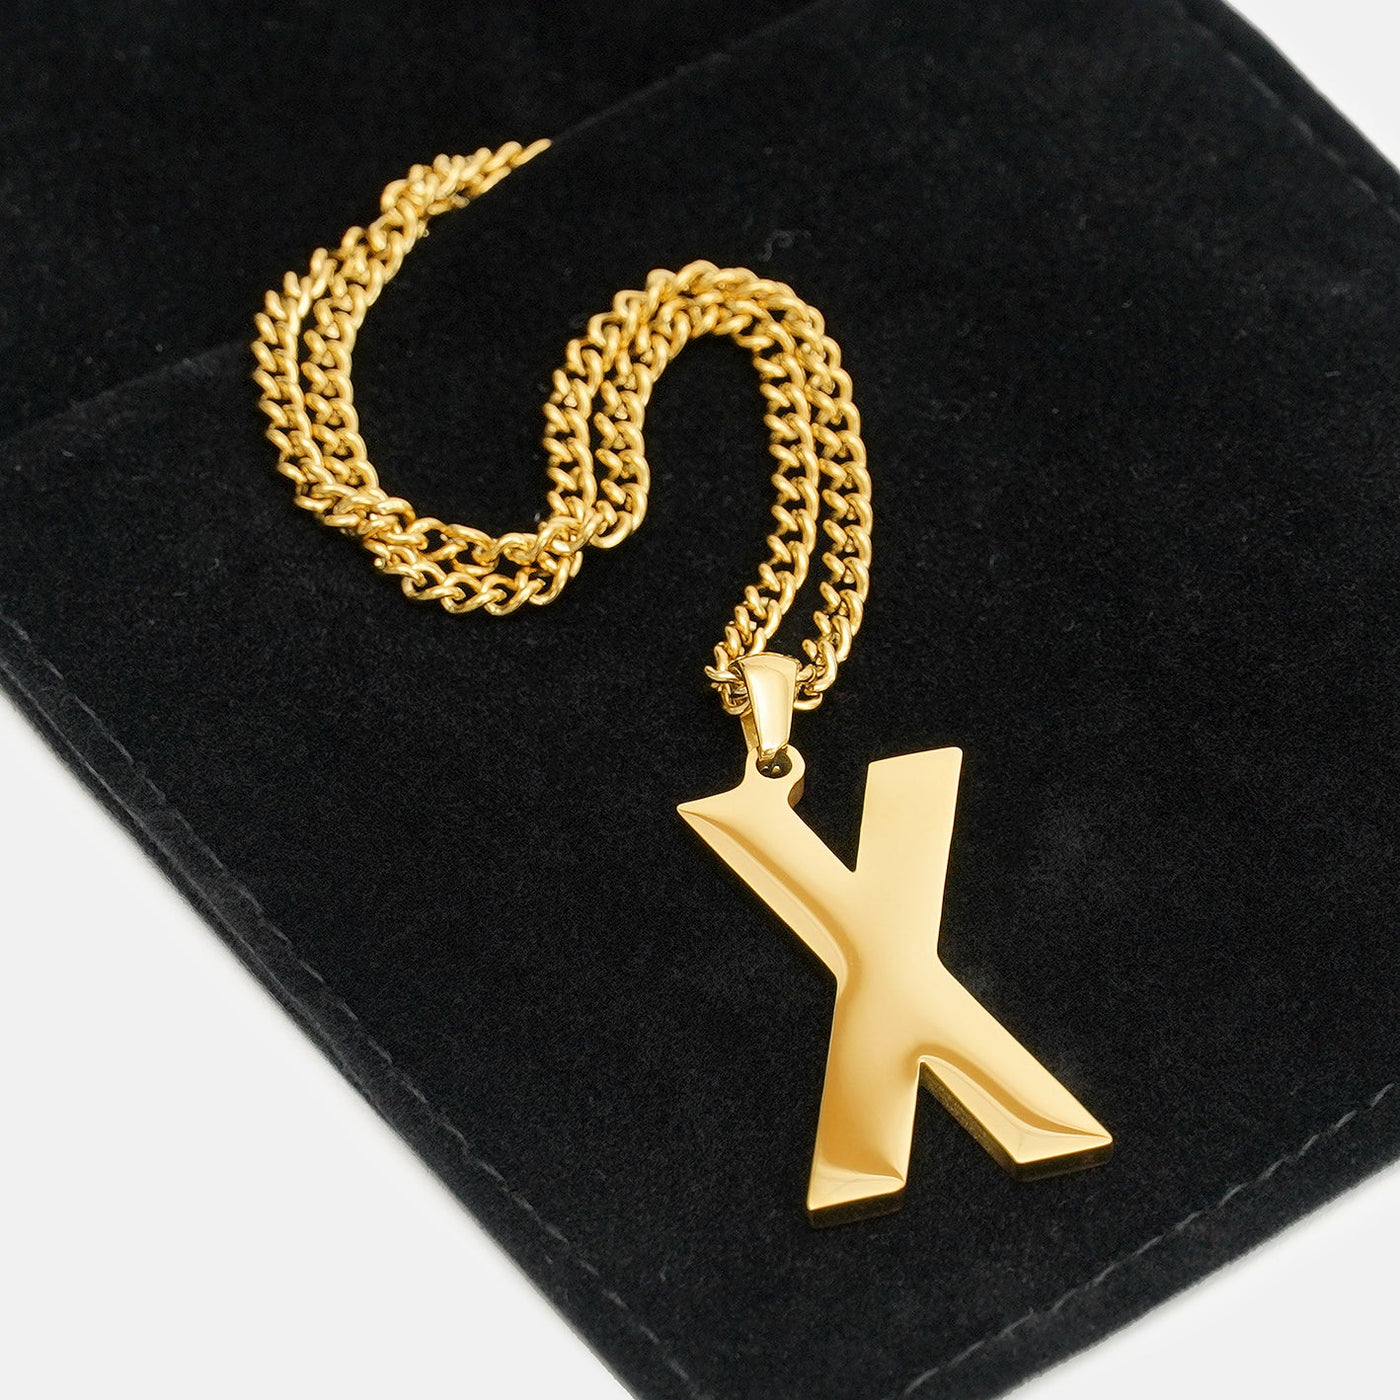 X Letter Pendant with Chain Kids Necklace - Gold Plated Stainless Steel